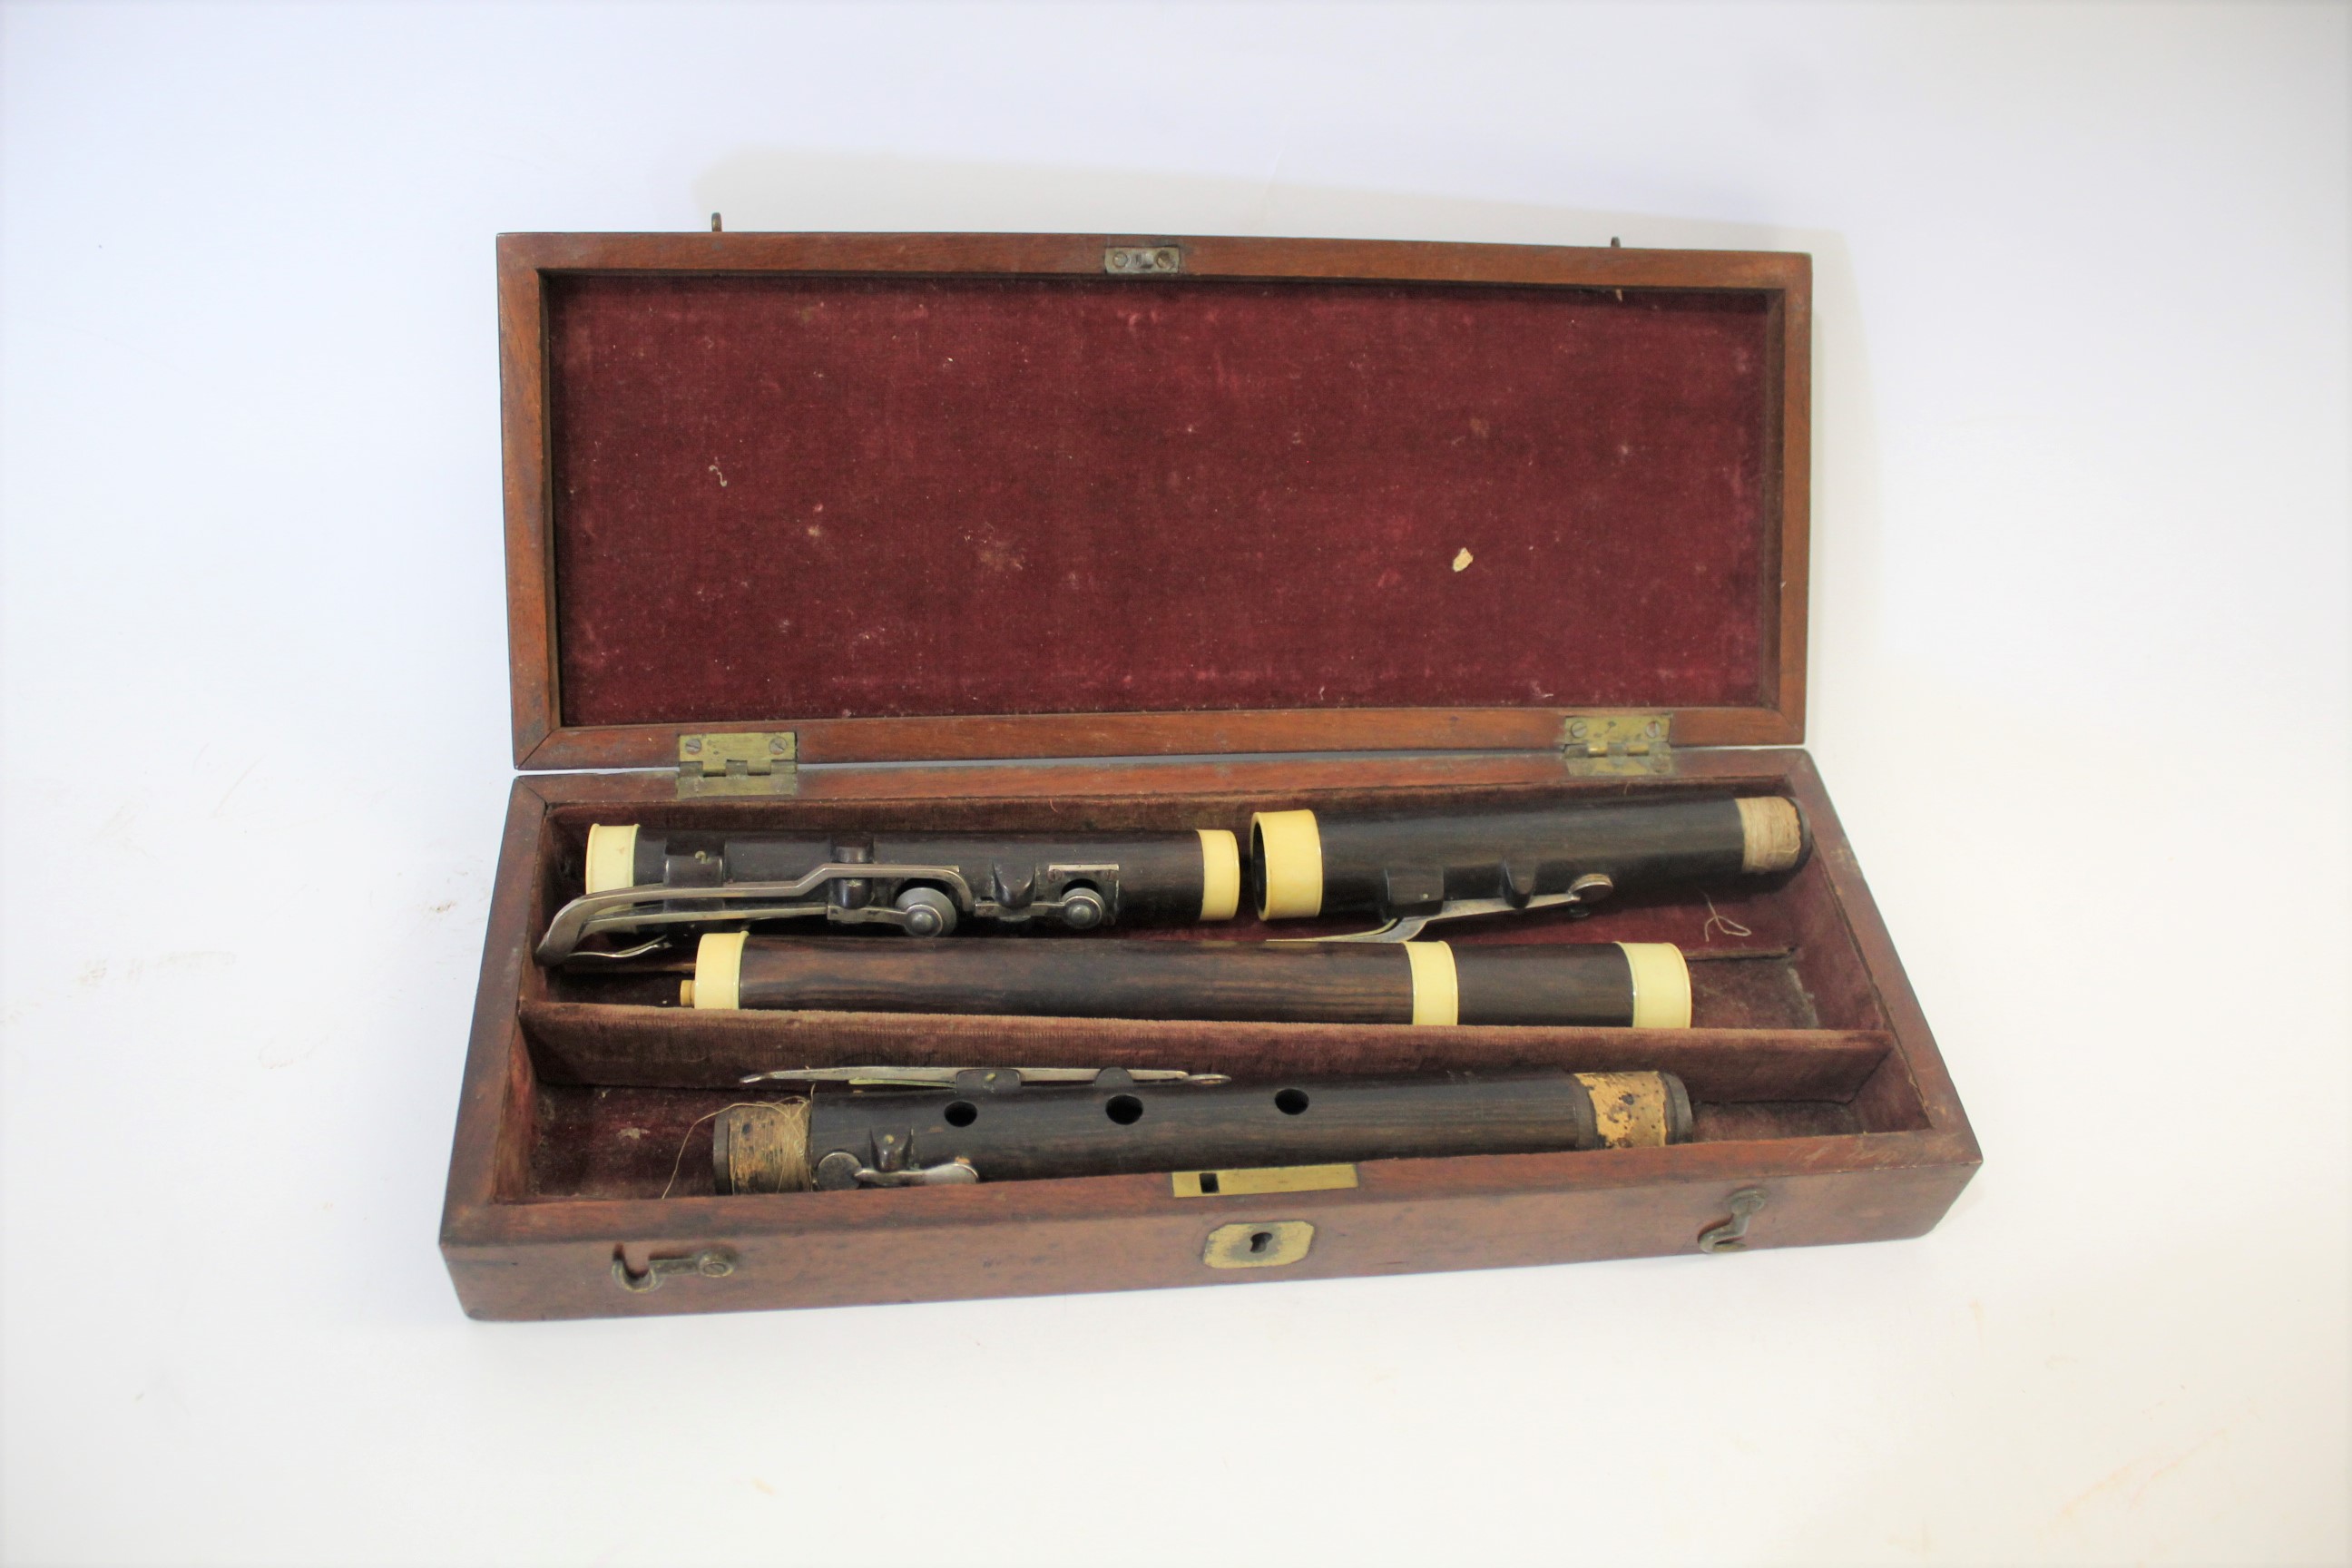 CASED 19THC FLUTE - W BARK, LONDON a 19thc rosewood flute, in four sections and with ivory joins.